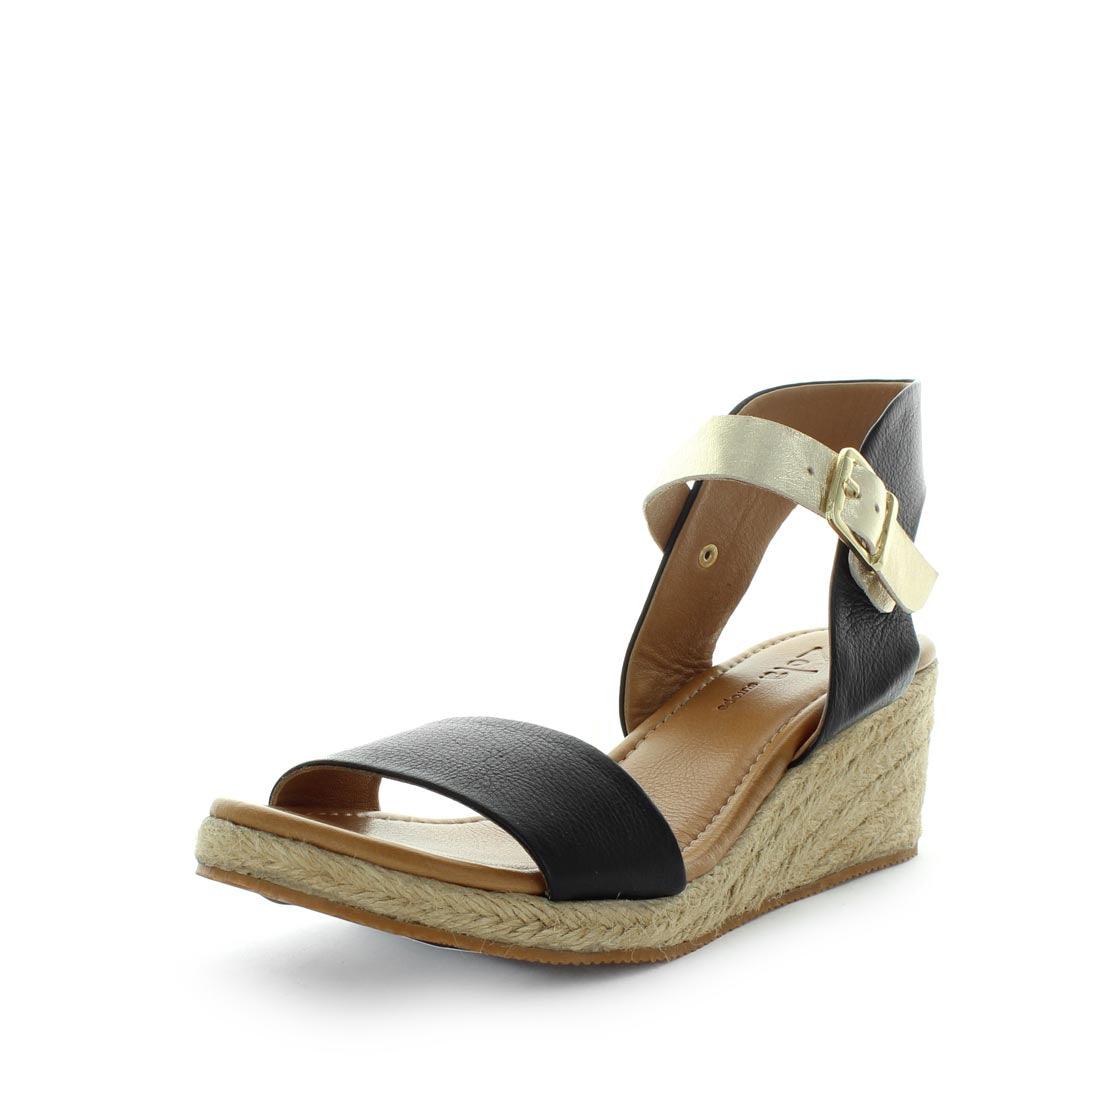 HADALI by ZOLA - iShoes - NEW ARRIVALS, What's New, What's New: Most Popular, What's New: Women's New Arrivals, Women's Shoes: Wedges - FOOTWEAR-FOOTWEAR